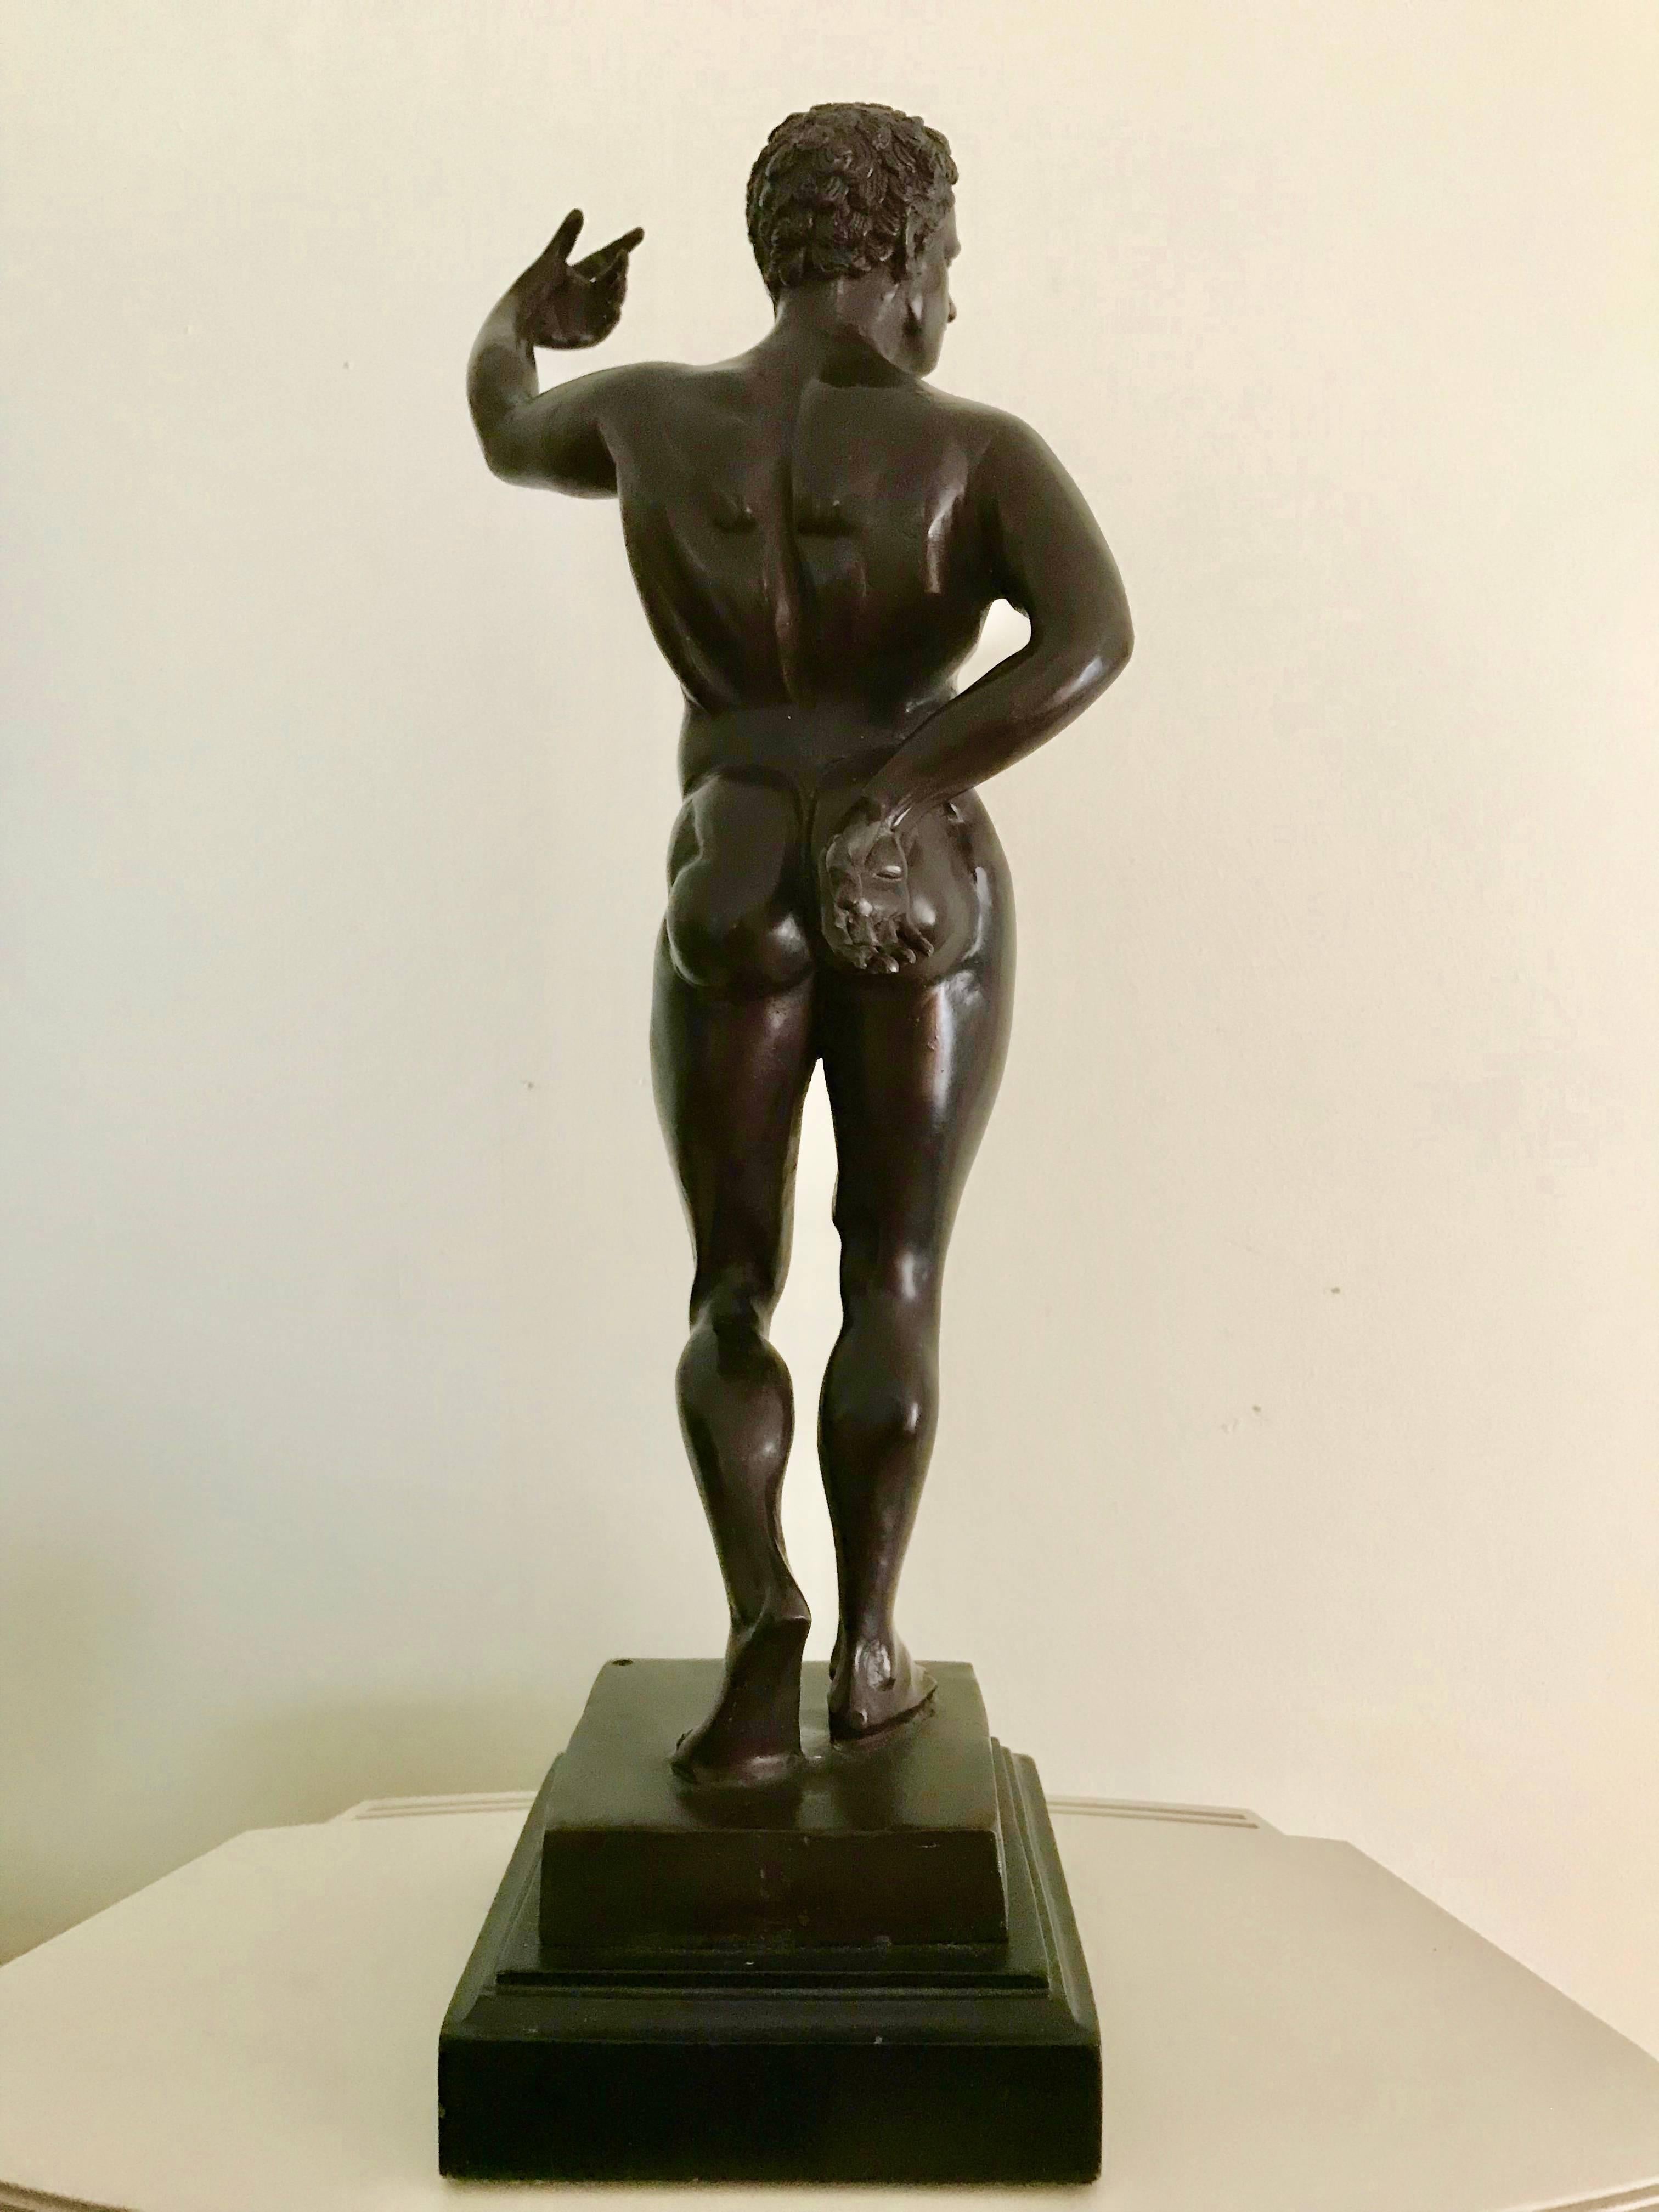 Italian Grand Tour bronze of a standing naked male warrior, his uplifted left arm once held a spear. Modeled after an ancient Roman or Geek original, the figure is shown in a Classic 'contrapposto' stance, with one arm behind the back and one held